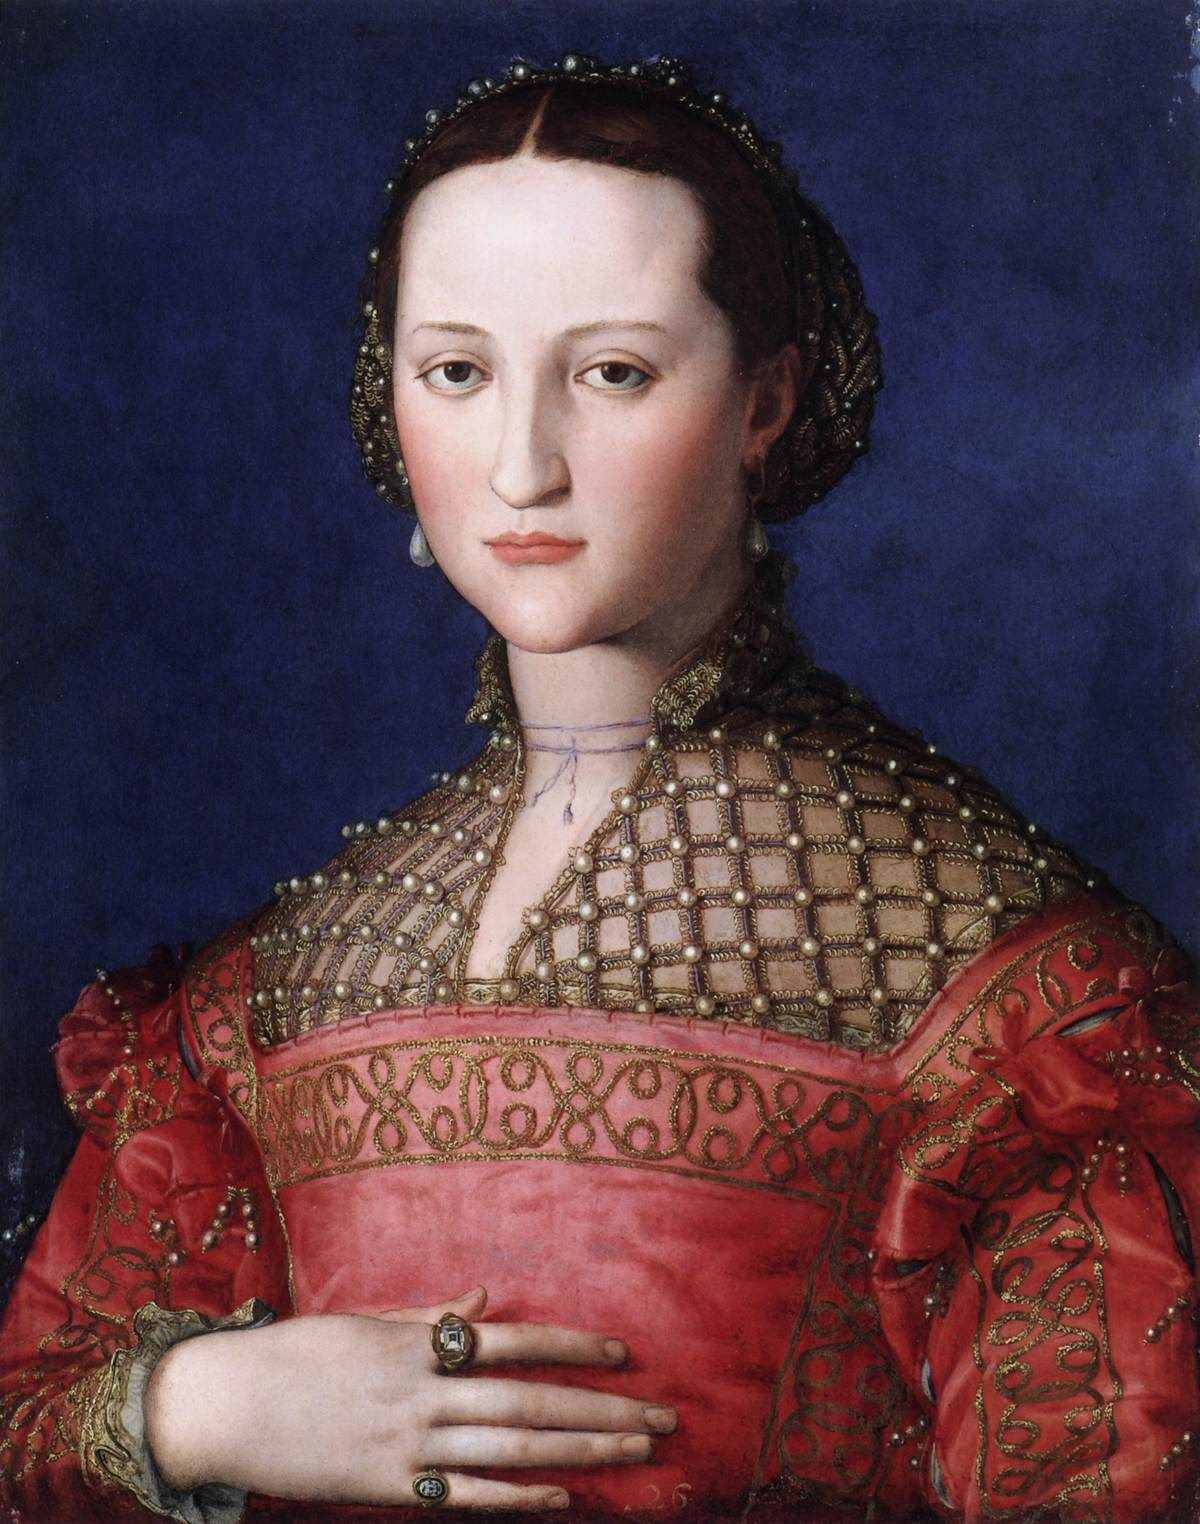 Painted shortly after Eleanora married Cosimo I de'Medici in 1539. The large diamond on her first figure was her wedding ring. The smaller ring on her pinky is a signet ring with her personal emblem. Portrait of Eleonora di Toledo, by Bronzino, 1543. Národní Galerie, Prague 